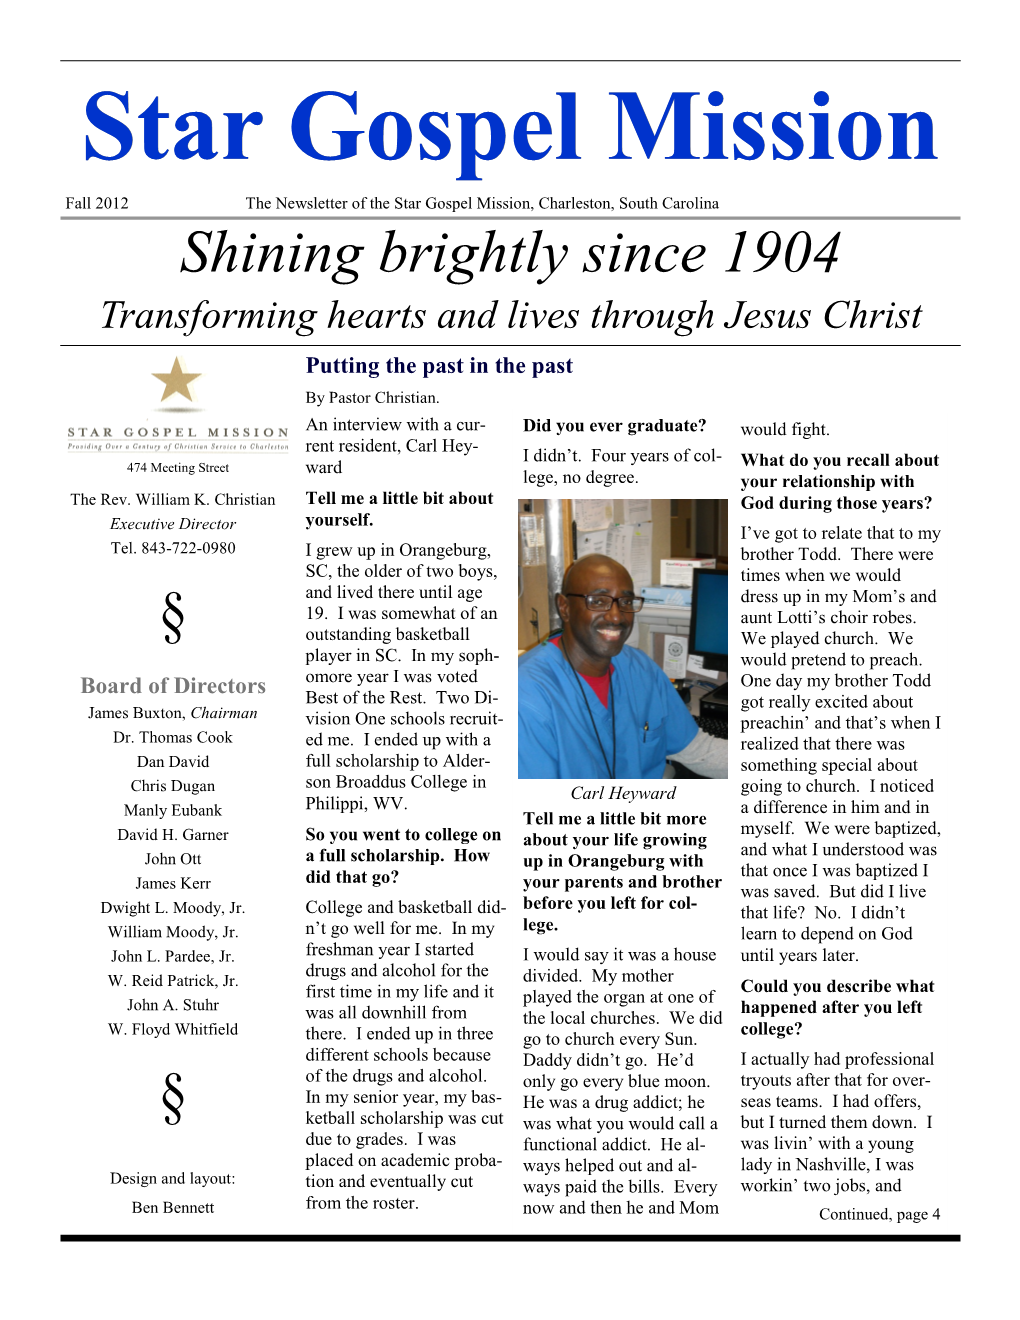 Shining Brightly Since 1904 Transforming Hearts and Lives Through Jesus Christ Putting the Past in the Past by Pastor Christian